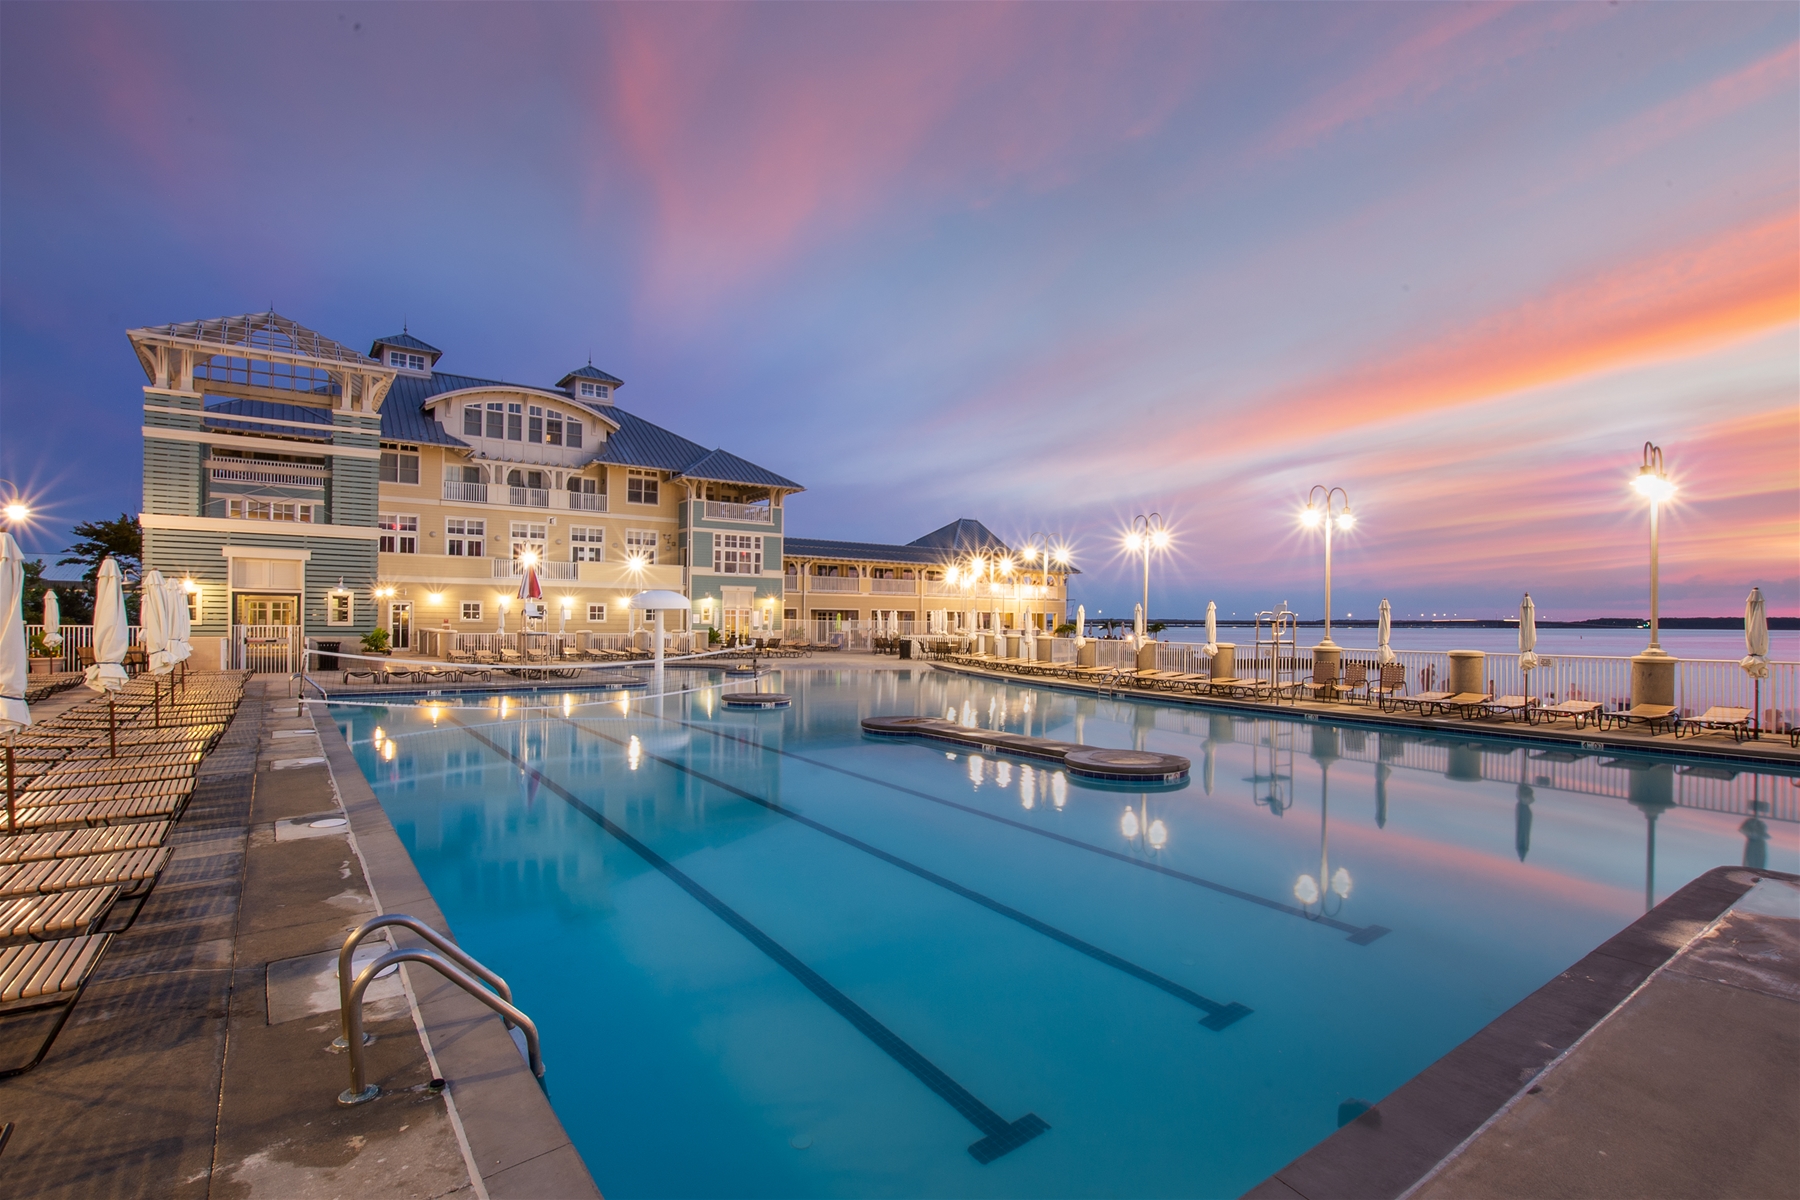 An oceanfront resort with a lap pool at sunset in Sunset Island MD